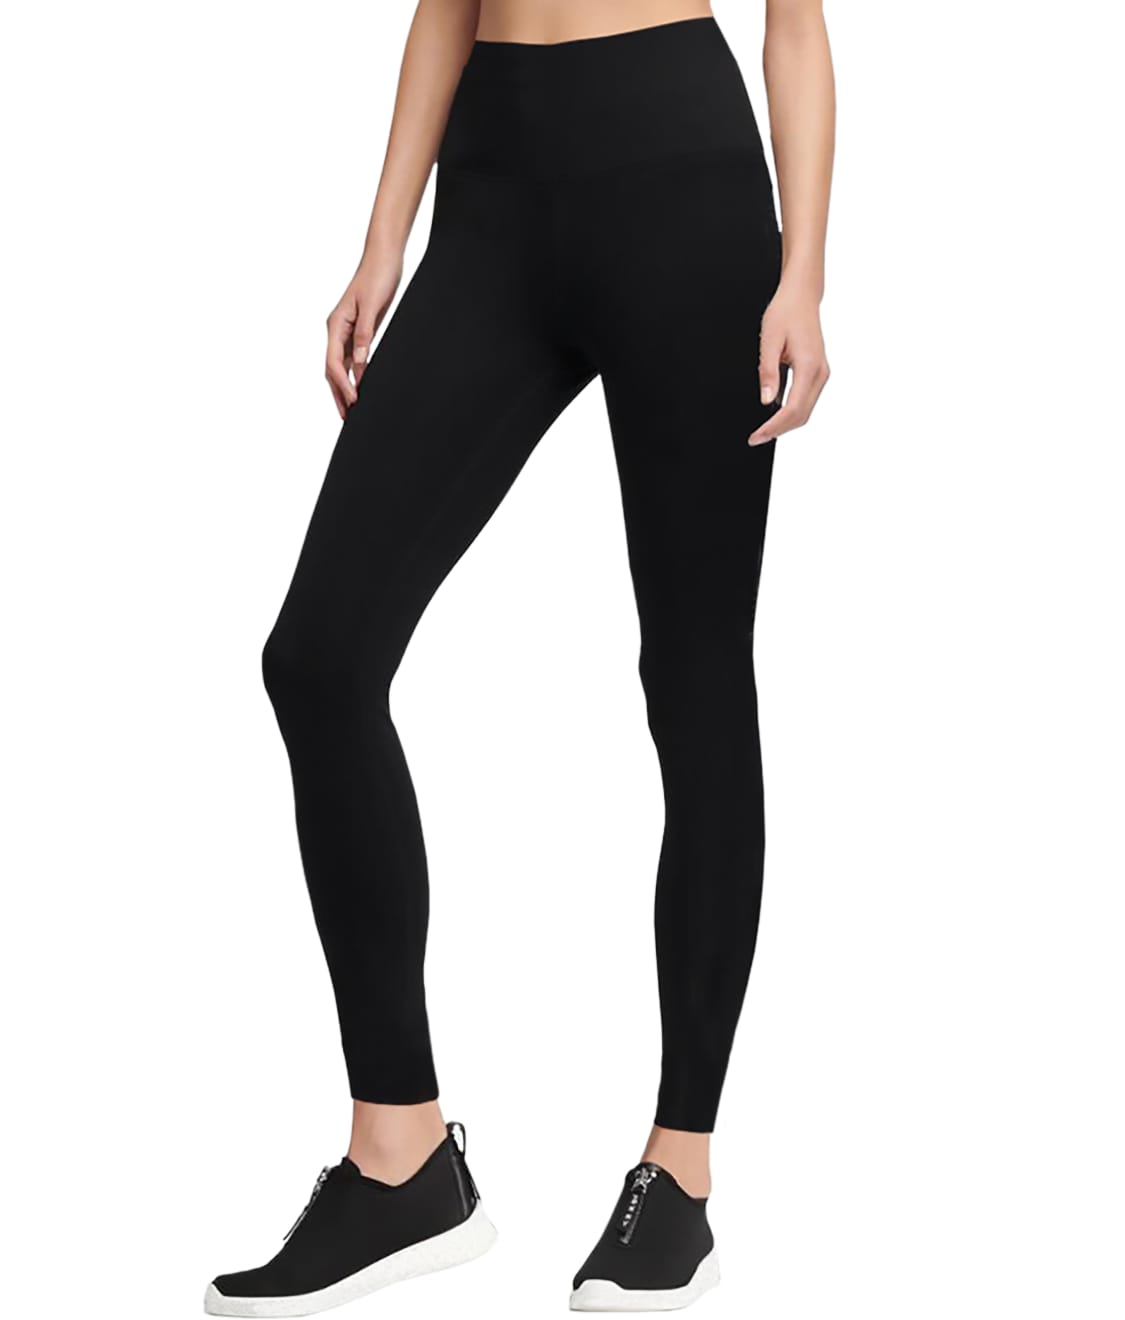 Running Bare Leggings Reviewed  International Society of Precision  Agriculture